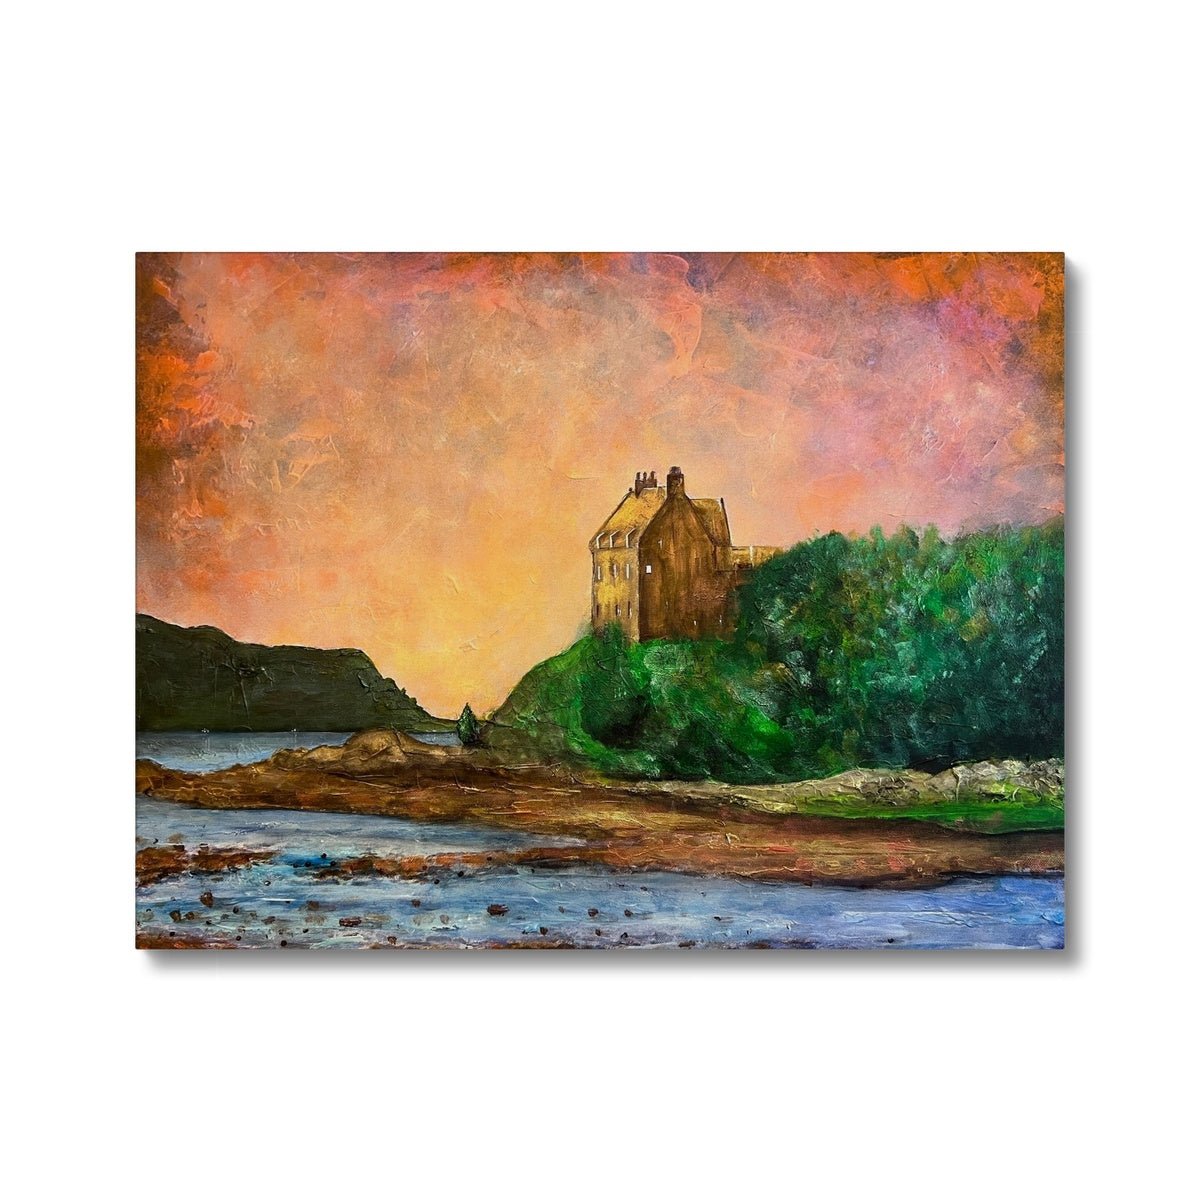 Duntrune Castle Painting | Canvas From Scotland-Contemporary Stretched Canvas Prints-Historic & Iconic Scotland Art Gallery-24"x18"-Paintings, Prints, Homeware, Art Gifts From Scotland By Scottish Artist Kevin Hunter